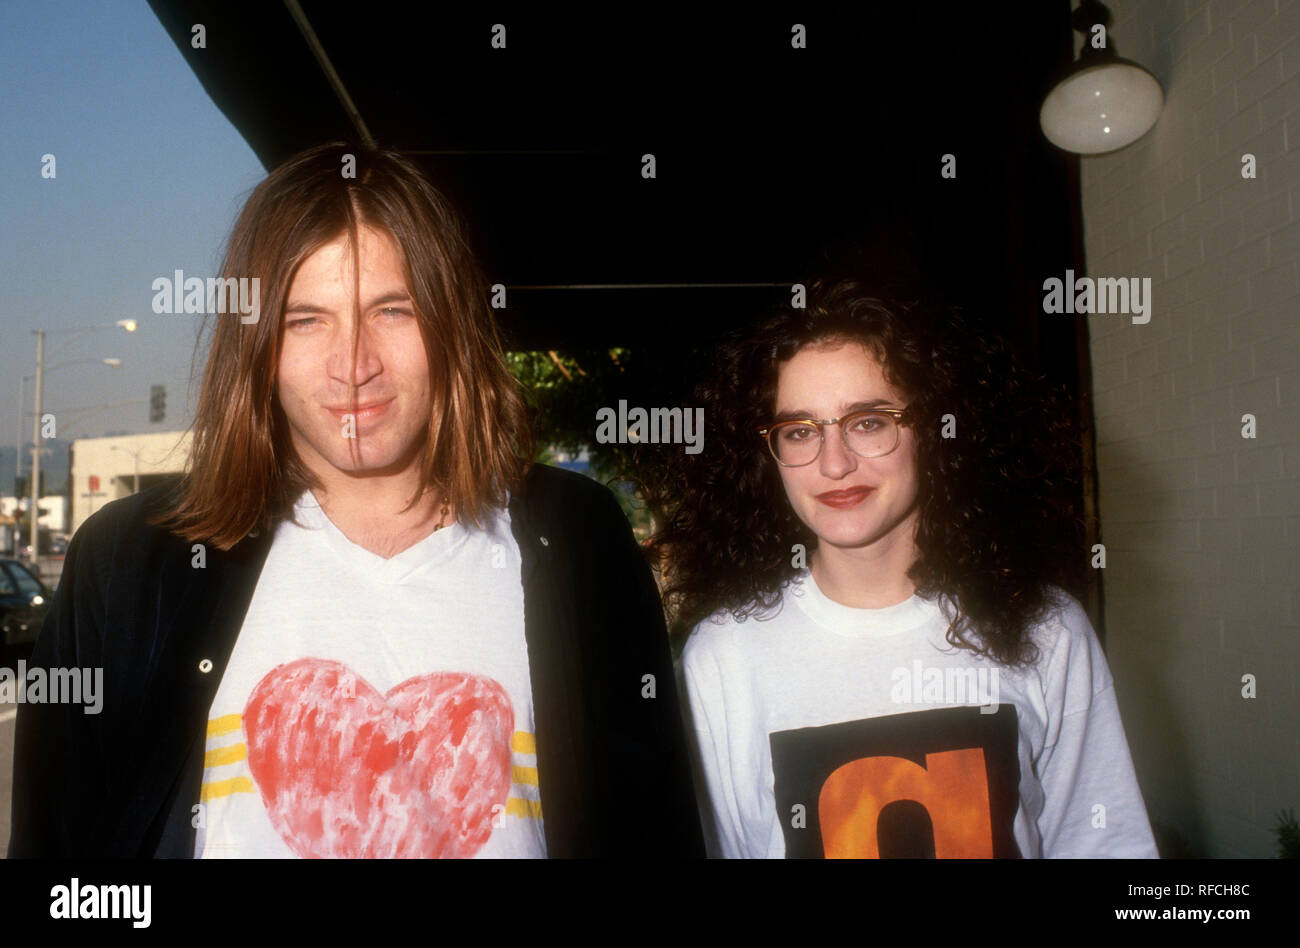 LOS ANGELES, CA - NOVEMBER 6: Singer Evan Dando of The Lemonheads and MTV VJ/commentator Kennedy attend Mouth to Mouth Event on November 6, 1993 at the Hard Rock Cafe in Los Angeles, California. Photo by Barry King/Alamy Stock Photo Stock Photo